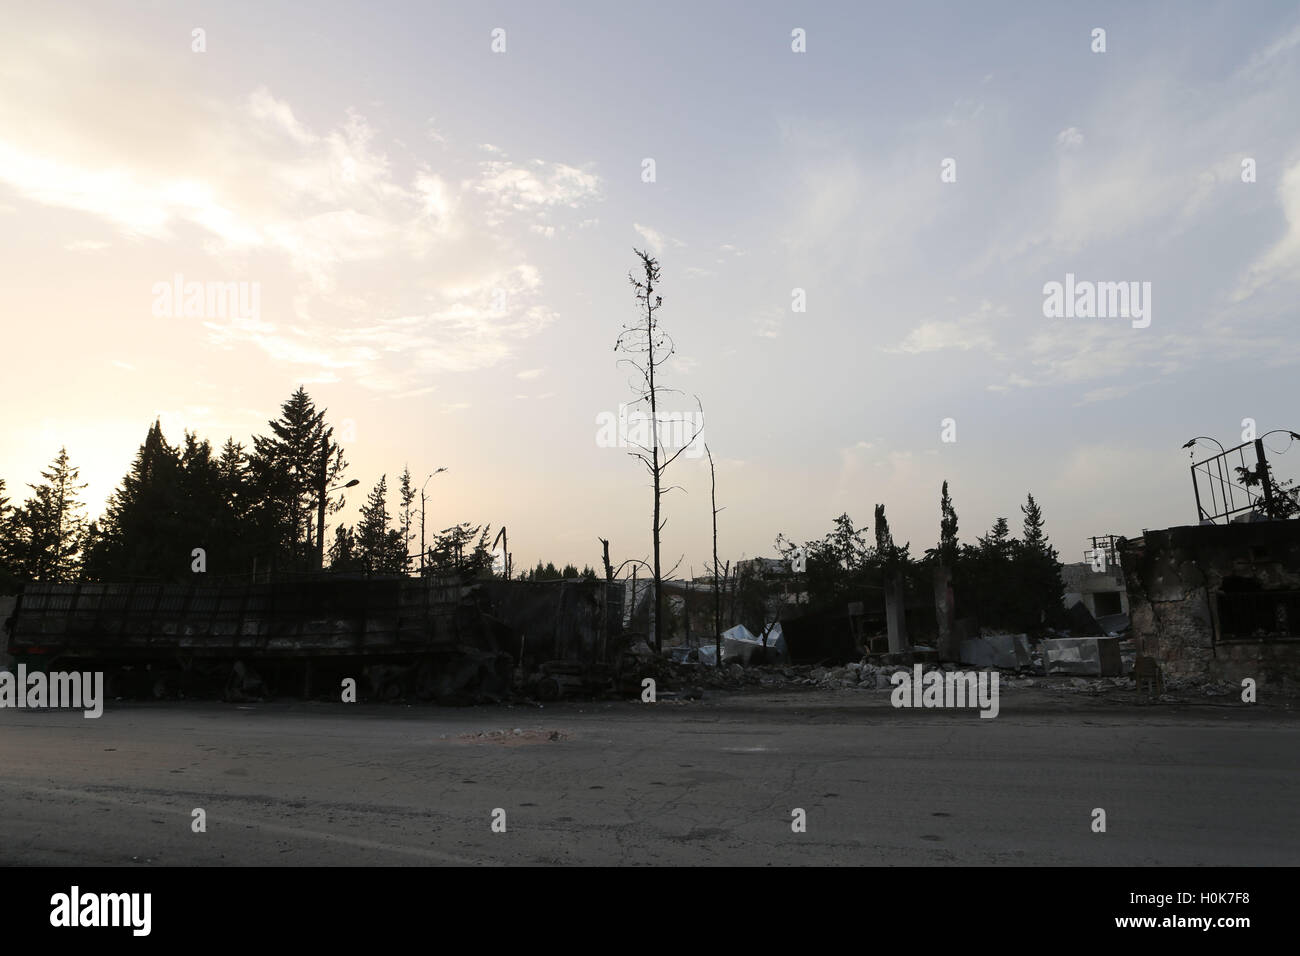 September 21, 2016 - Urum Al-Kubra, West of Aleppo, Syria - A convoy carrying humanitarian relief and directed to Aleppo under siege has been hit While the opposition blames the strike on the Syrian government and Russian forces, both Russia and the Syrian regime have denied any involvement. Credit:  Juma Muhammad/ImagesLive/ZUMA Wire/Alamy Live News Stock Photo